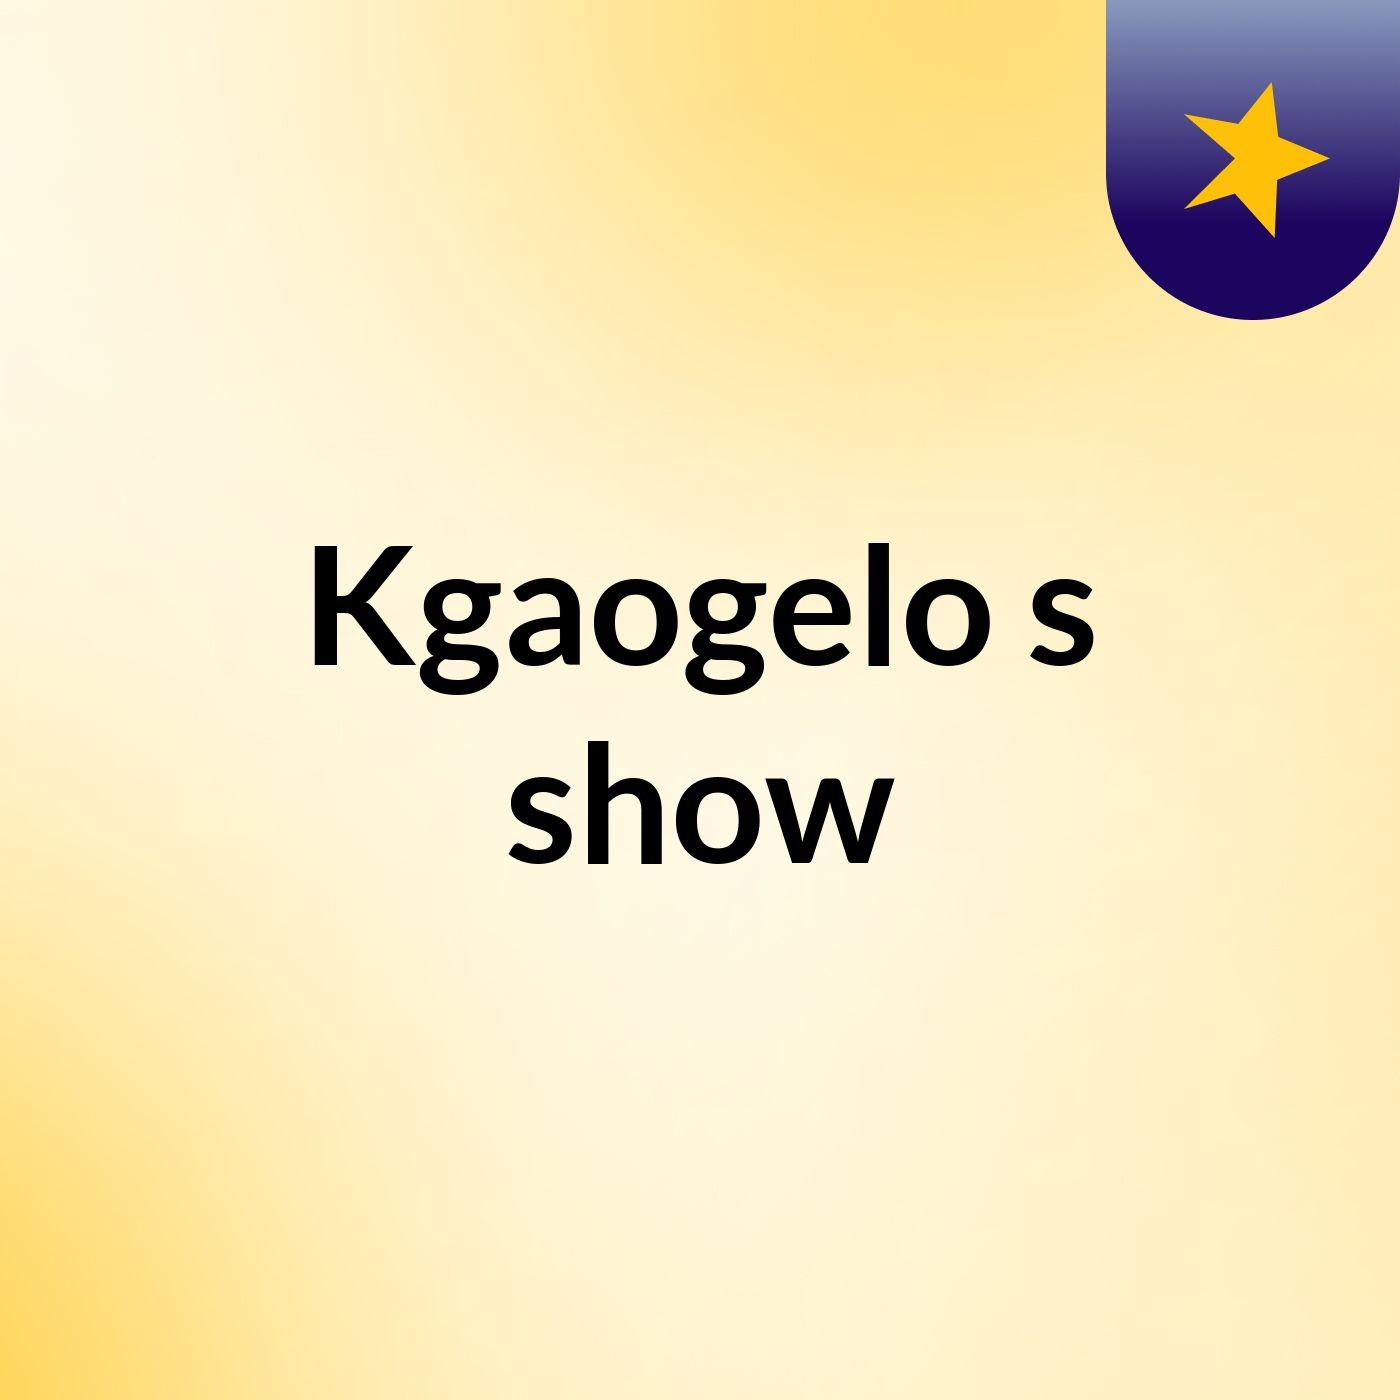 Kgaogelo's show